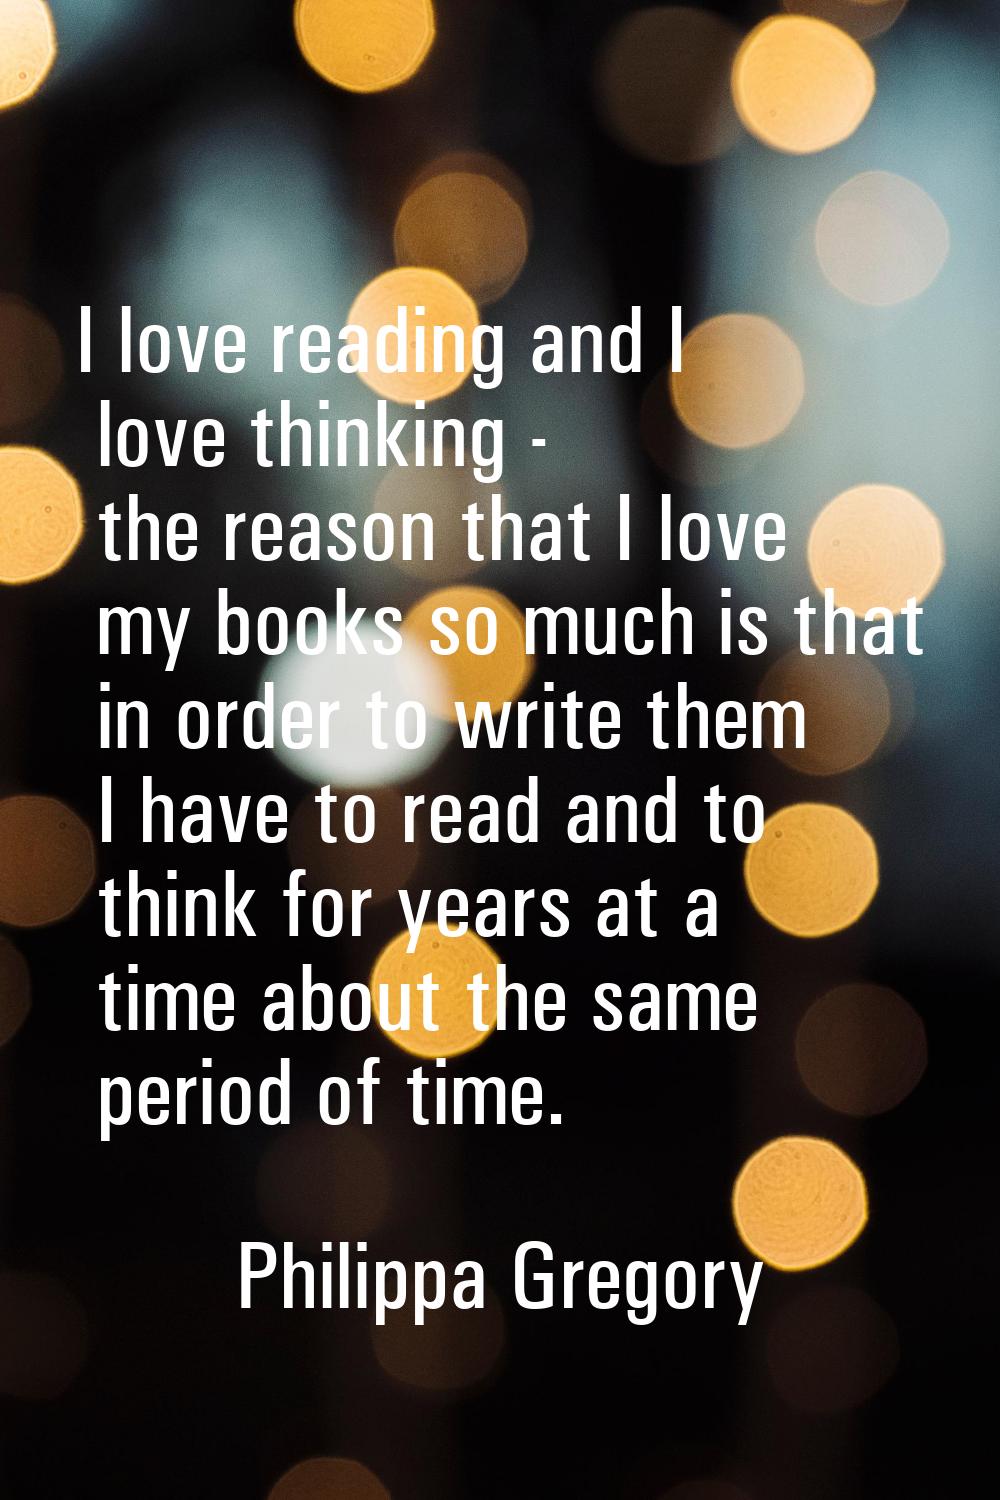 I love reading and I love thinking - the reason that I love my books so much is that in order to wr